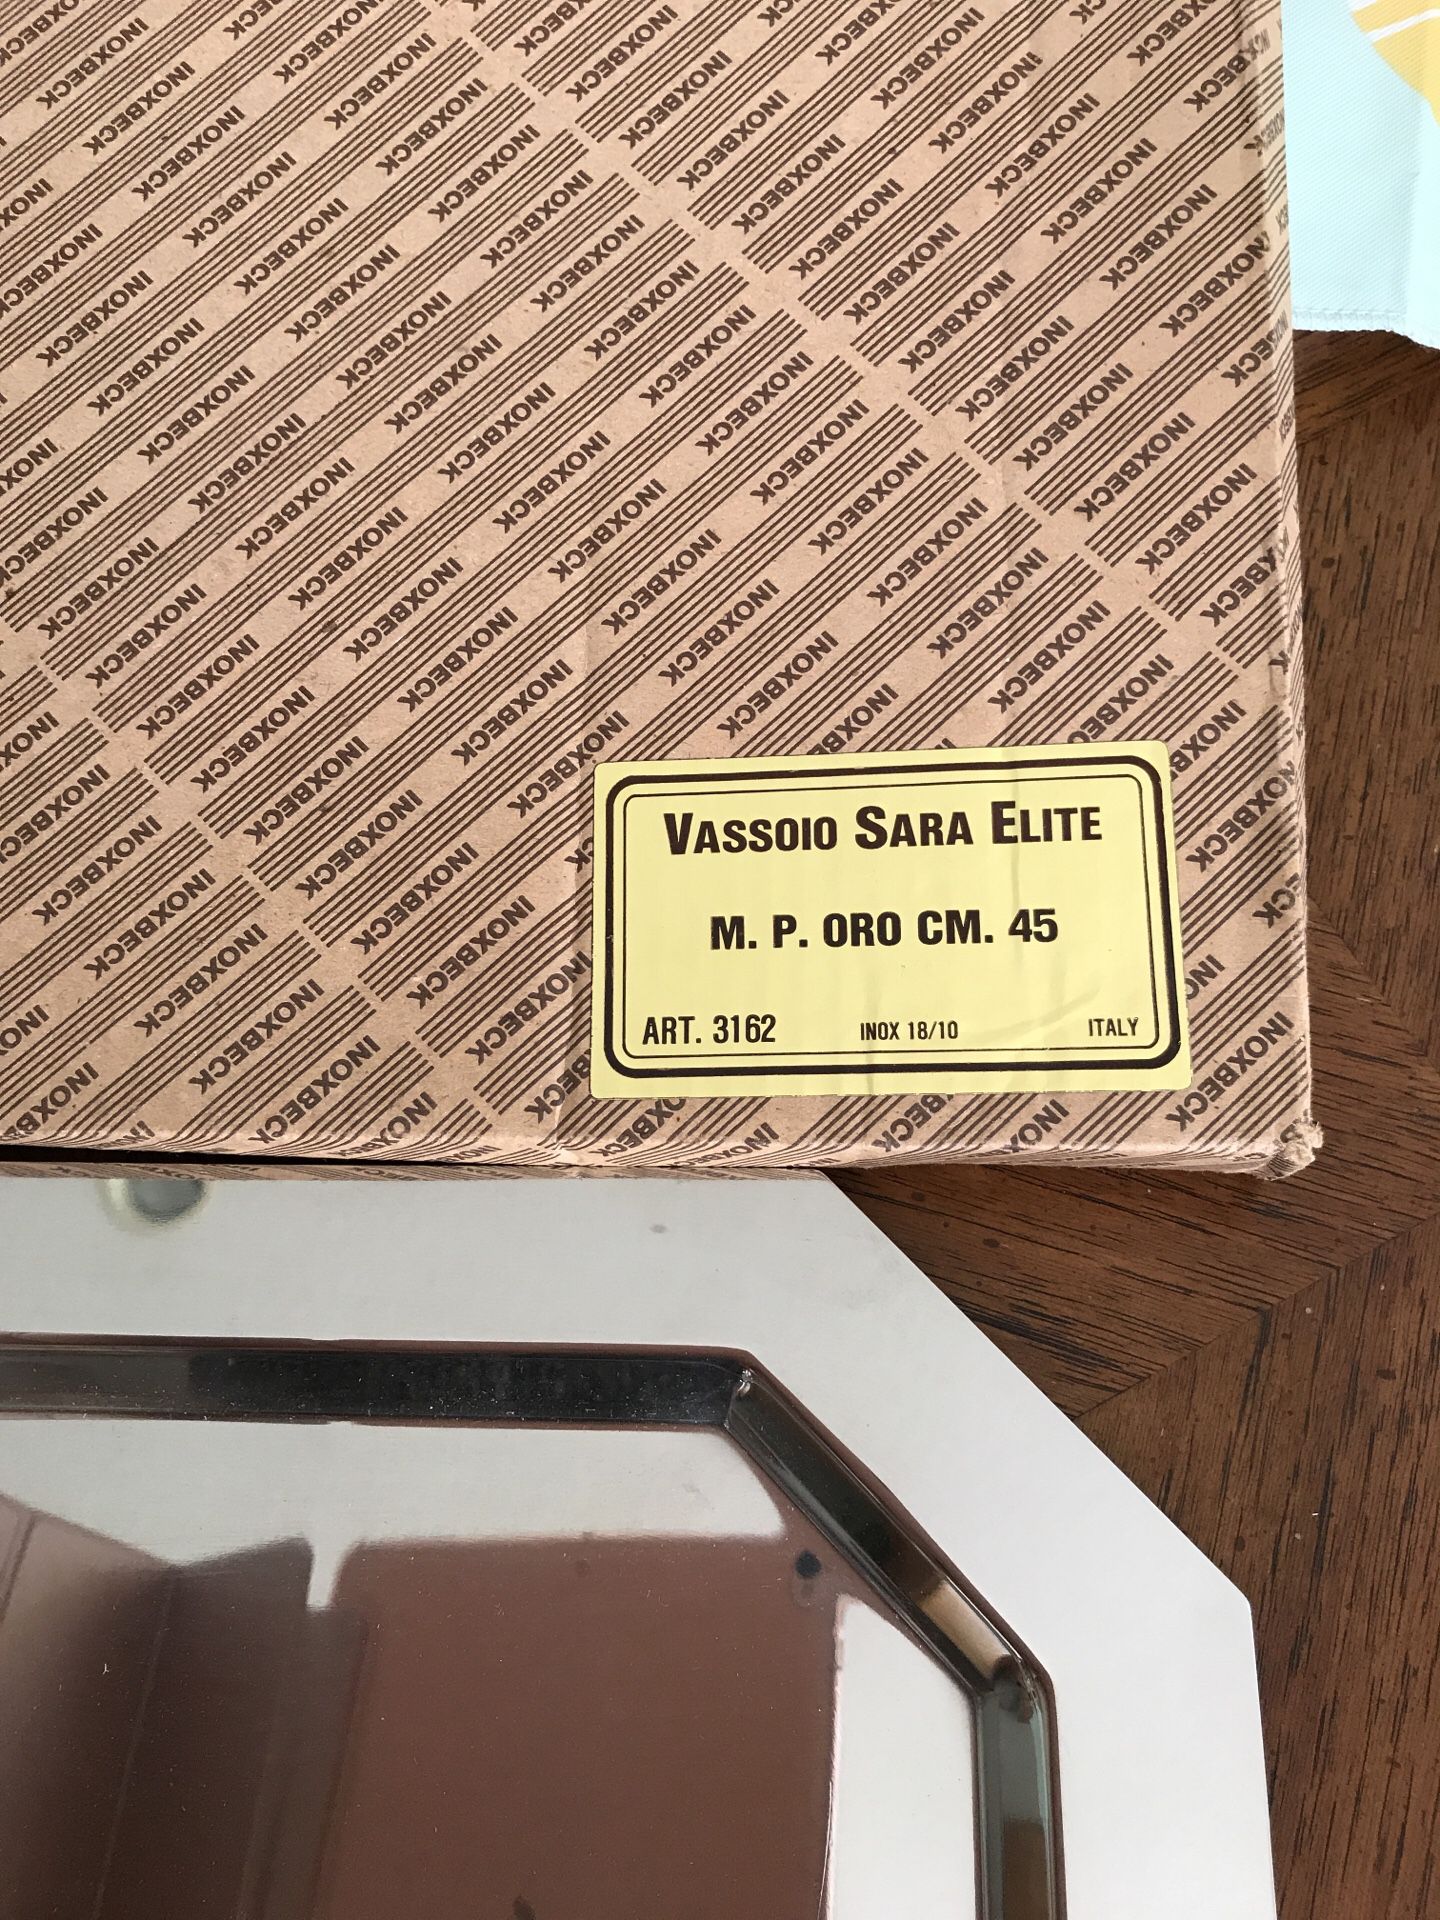 Custom made Lv Trays for Sale in Stamford, CT - OfferUp